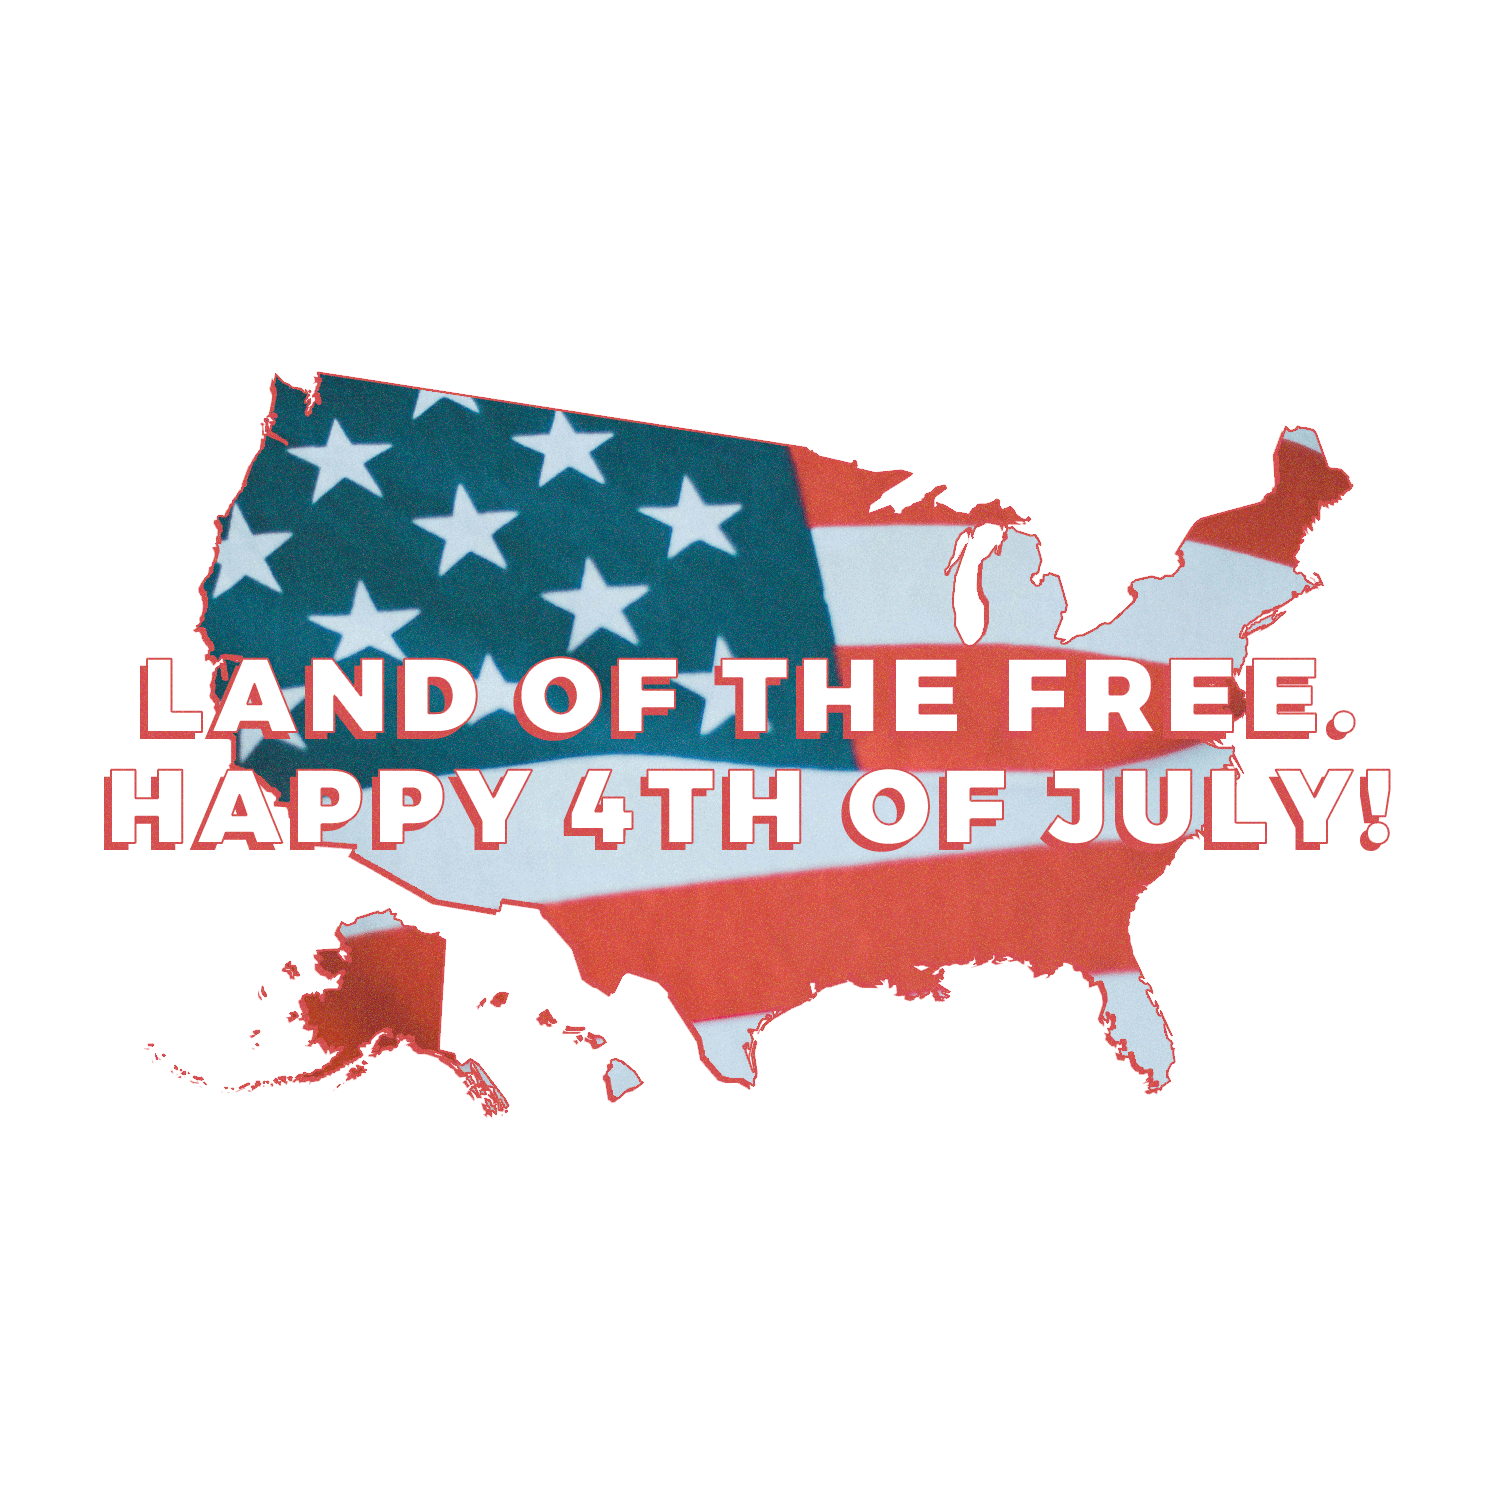 Independence Day: Freedom & Freedom in Christ